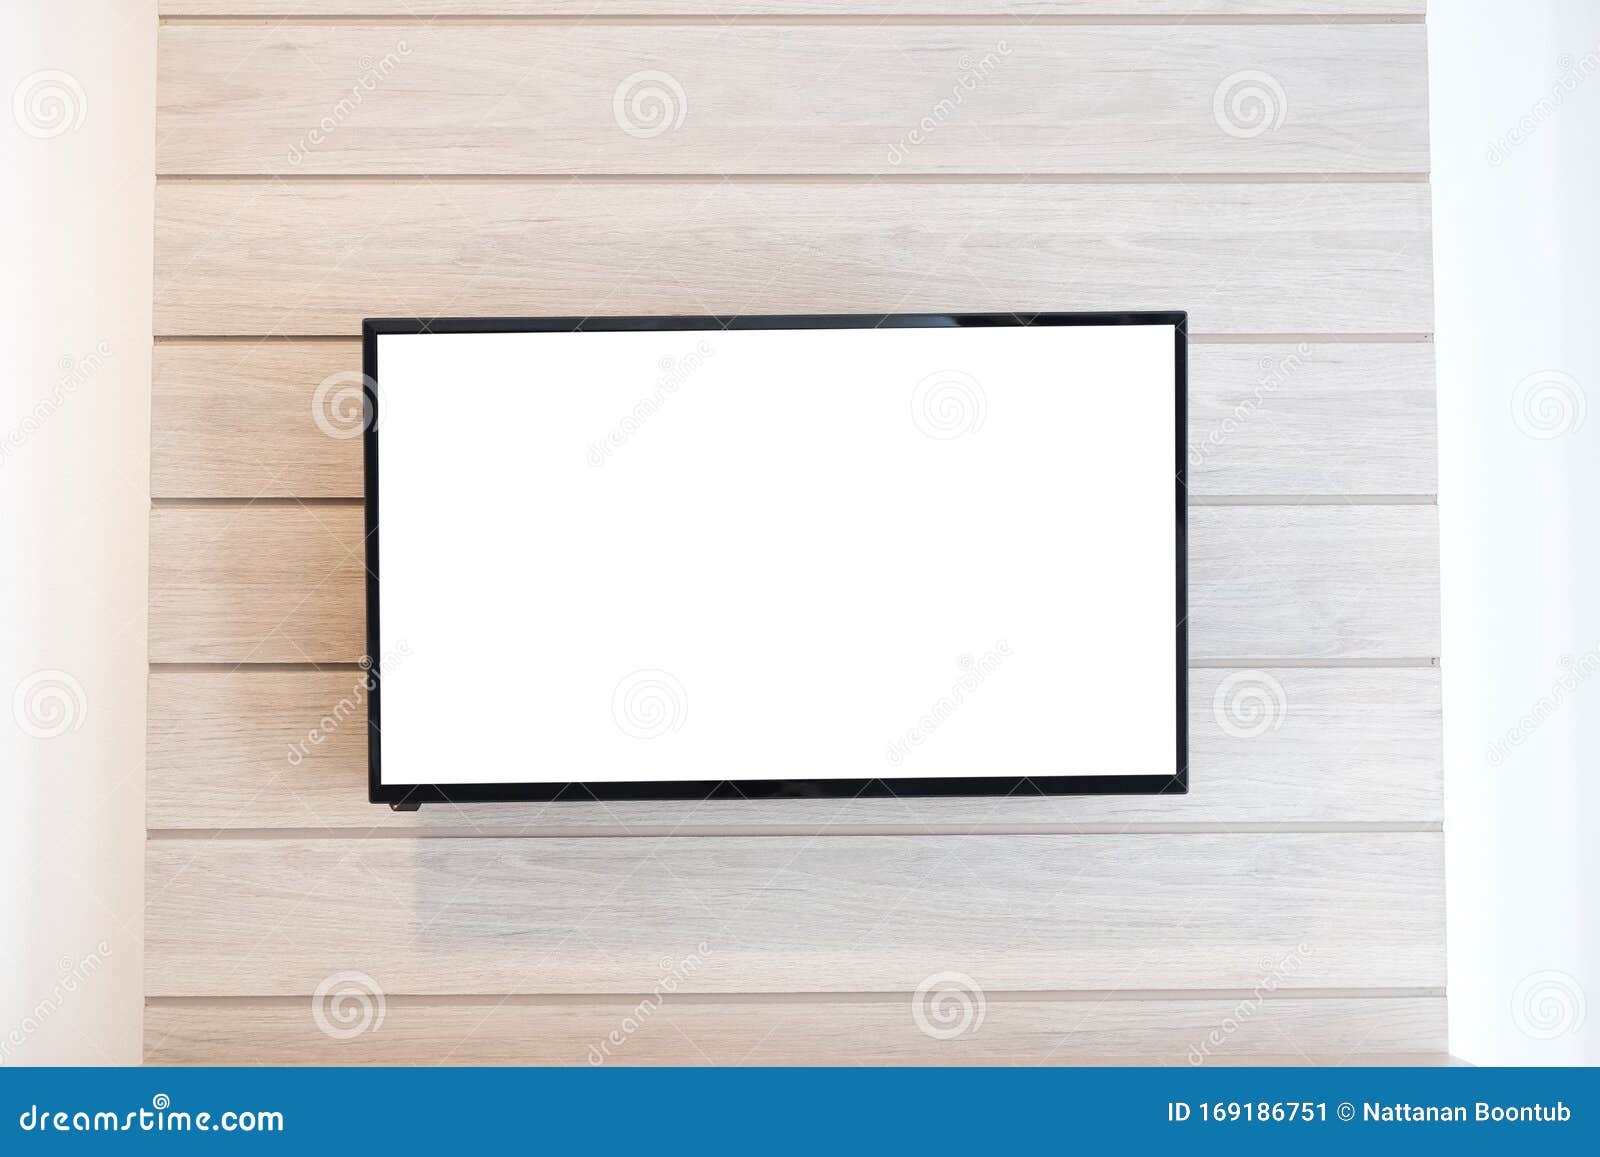 TV Blank White Screen on the Wall for Advertising Design Concept Stock Image - Image of hdtv, home: 169186751